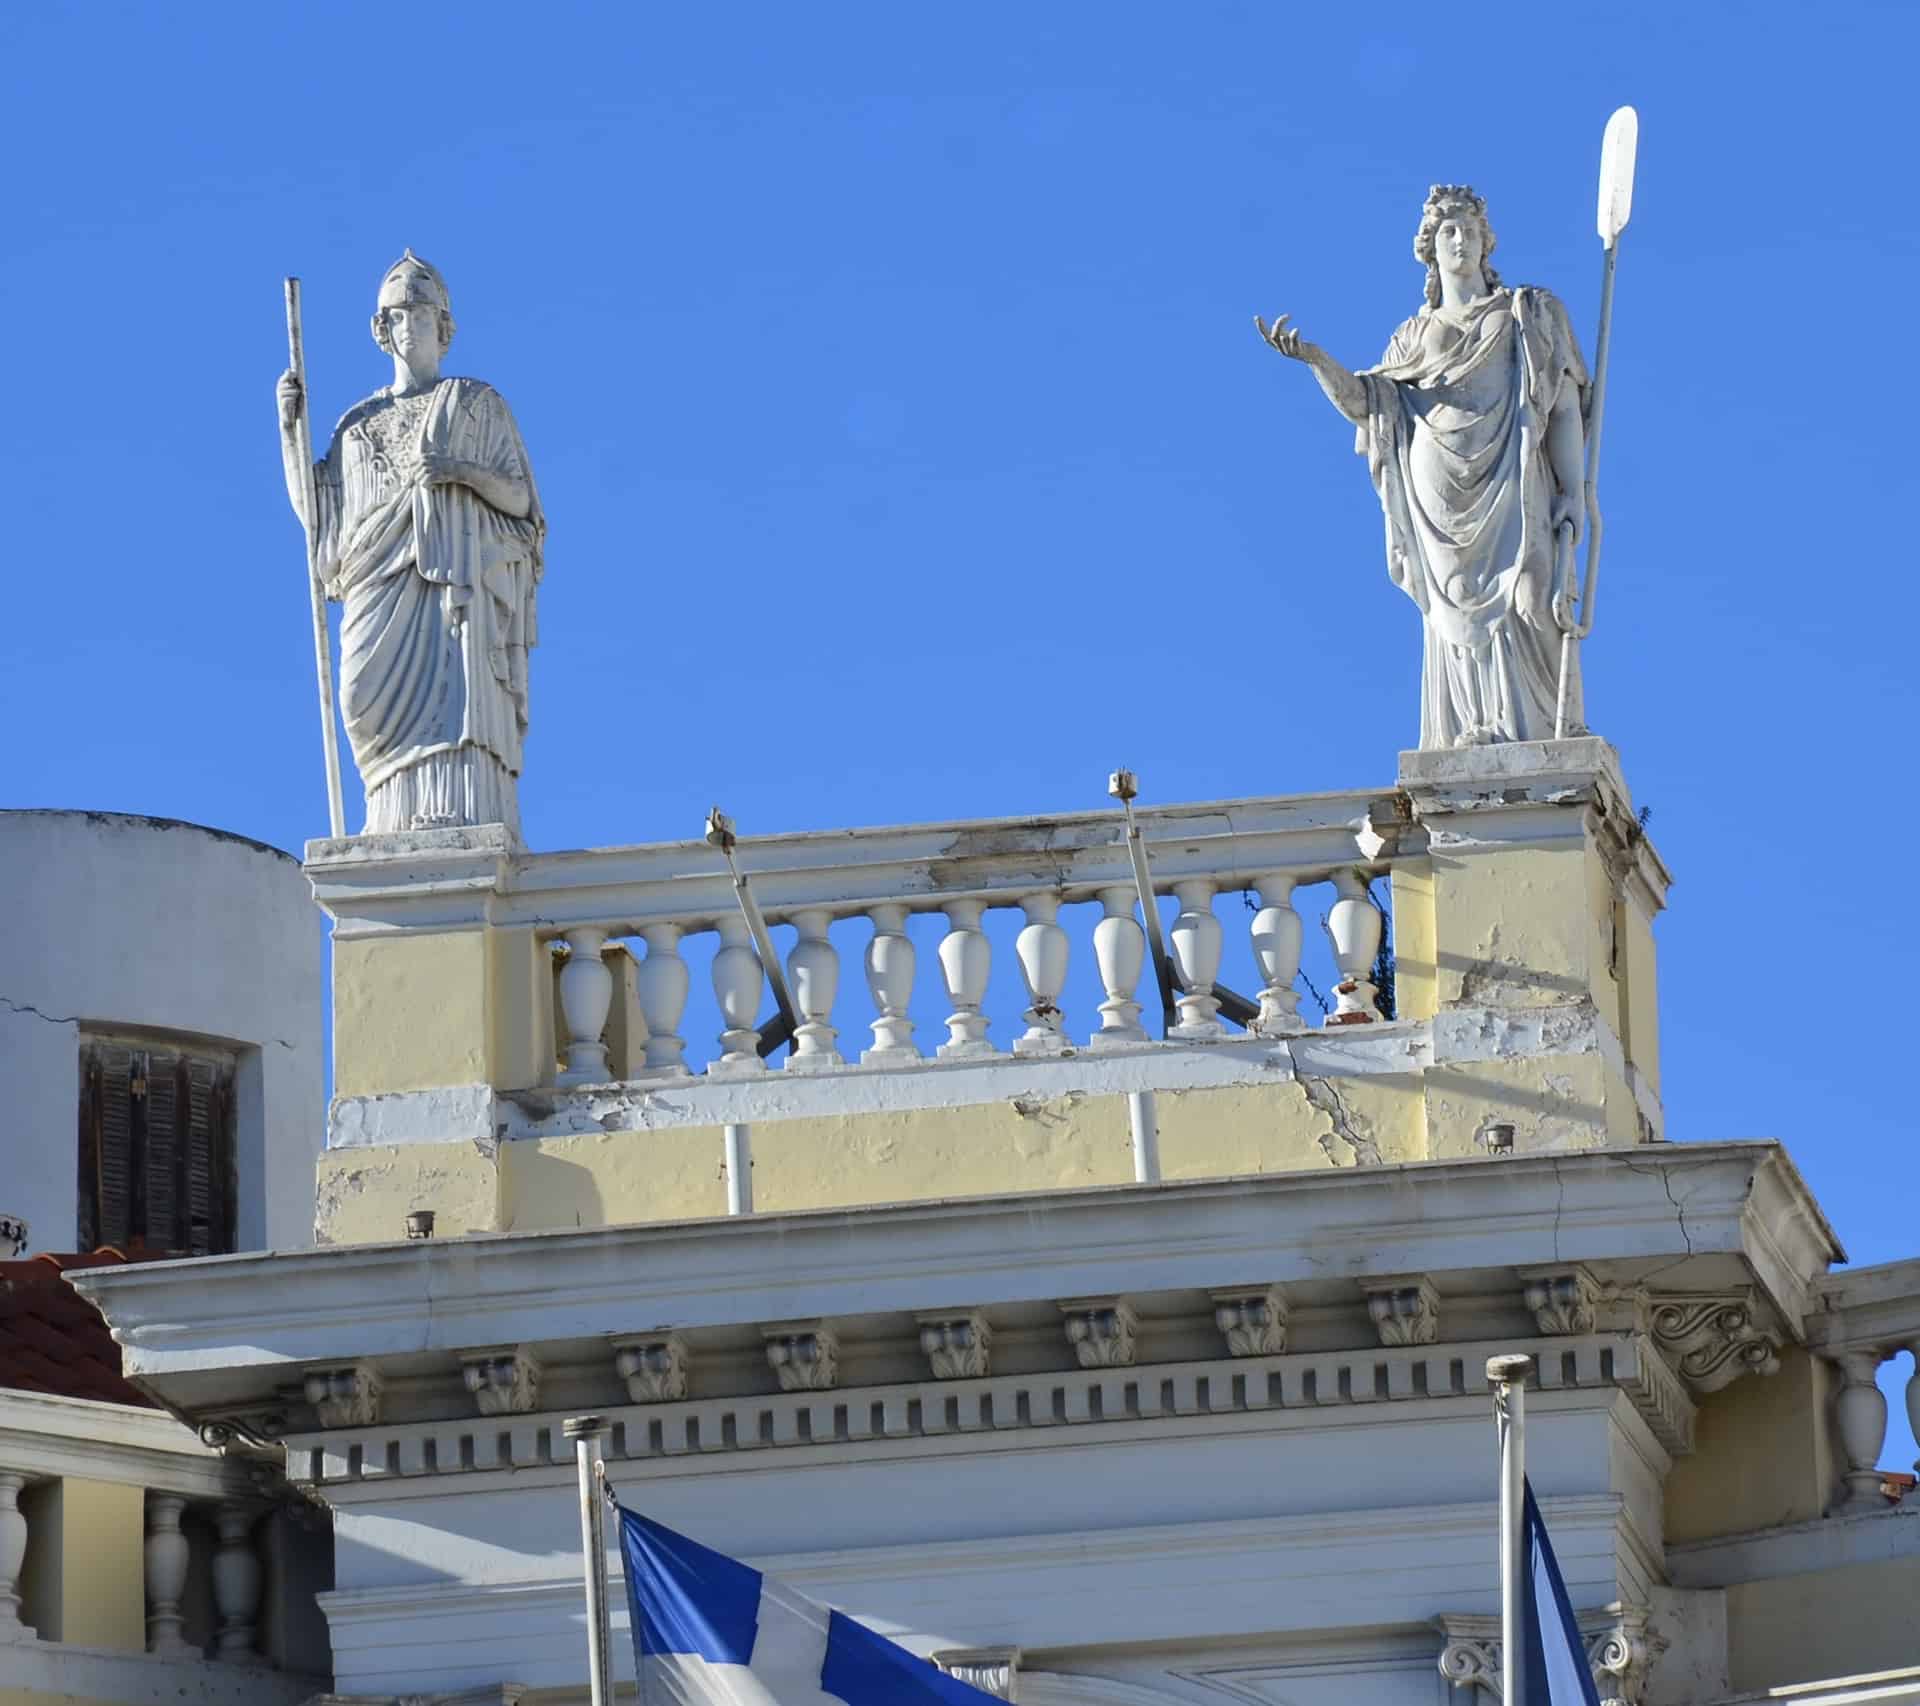 Statues atop the balcony of the Stathatos Mansion